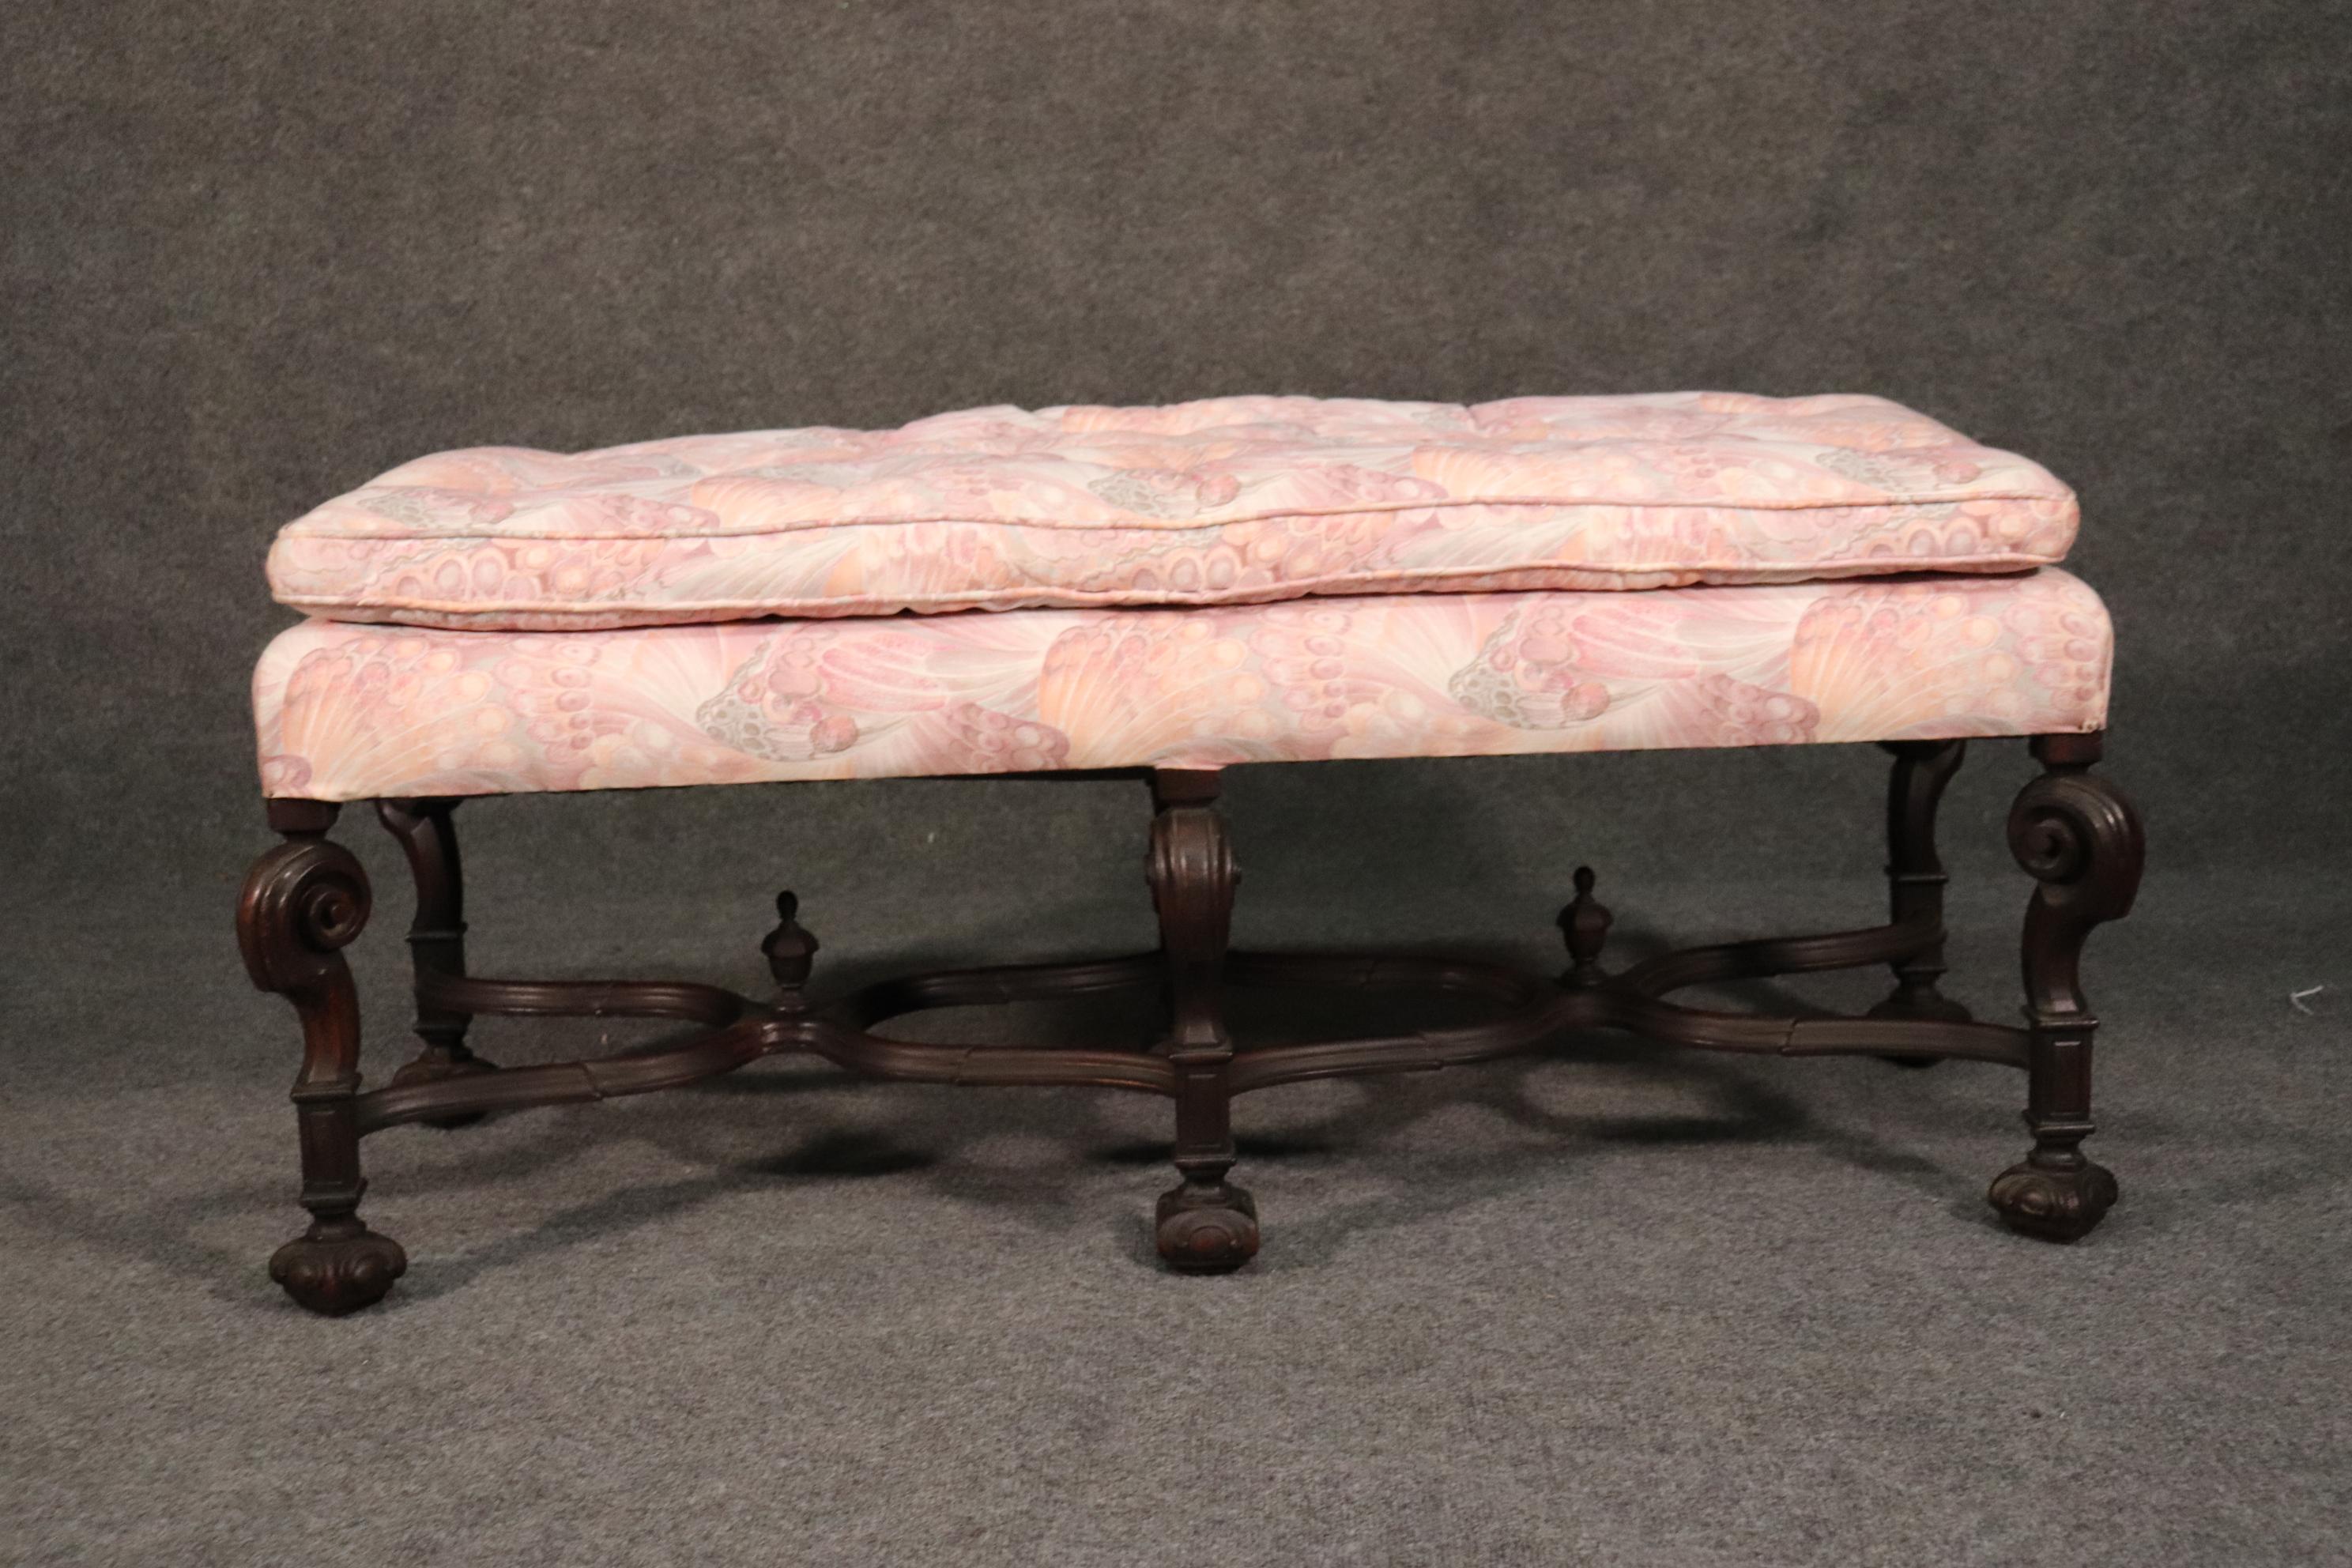 This is a rare Wlliam and Mary style English walnut bench. The frame has old stable repairs from many years ago. The upholstery is in good condition but will show signs of age and possible slight stains from use. The bench measures 47 wide x 20 tall